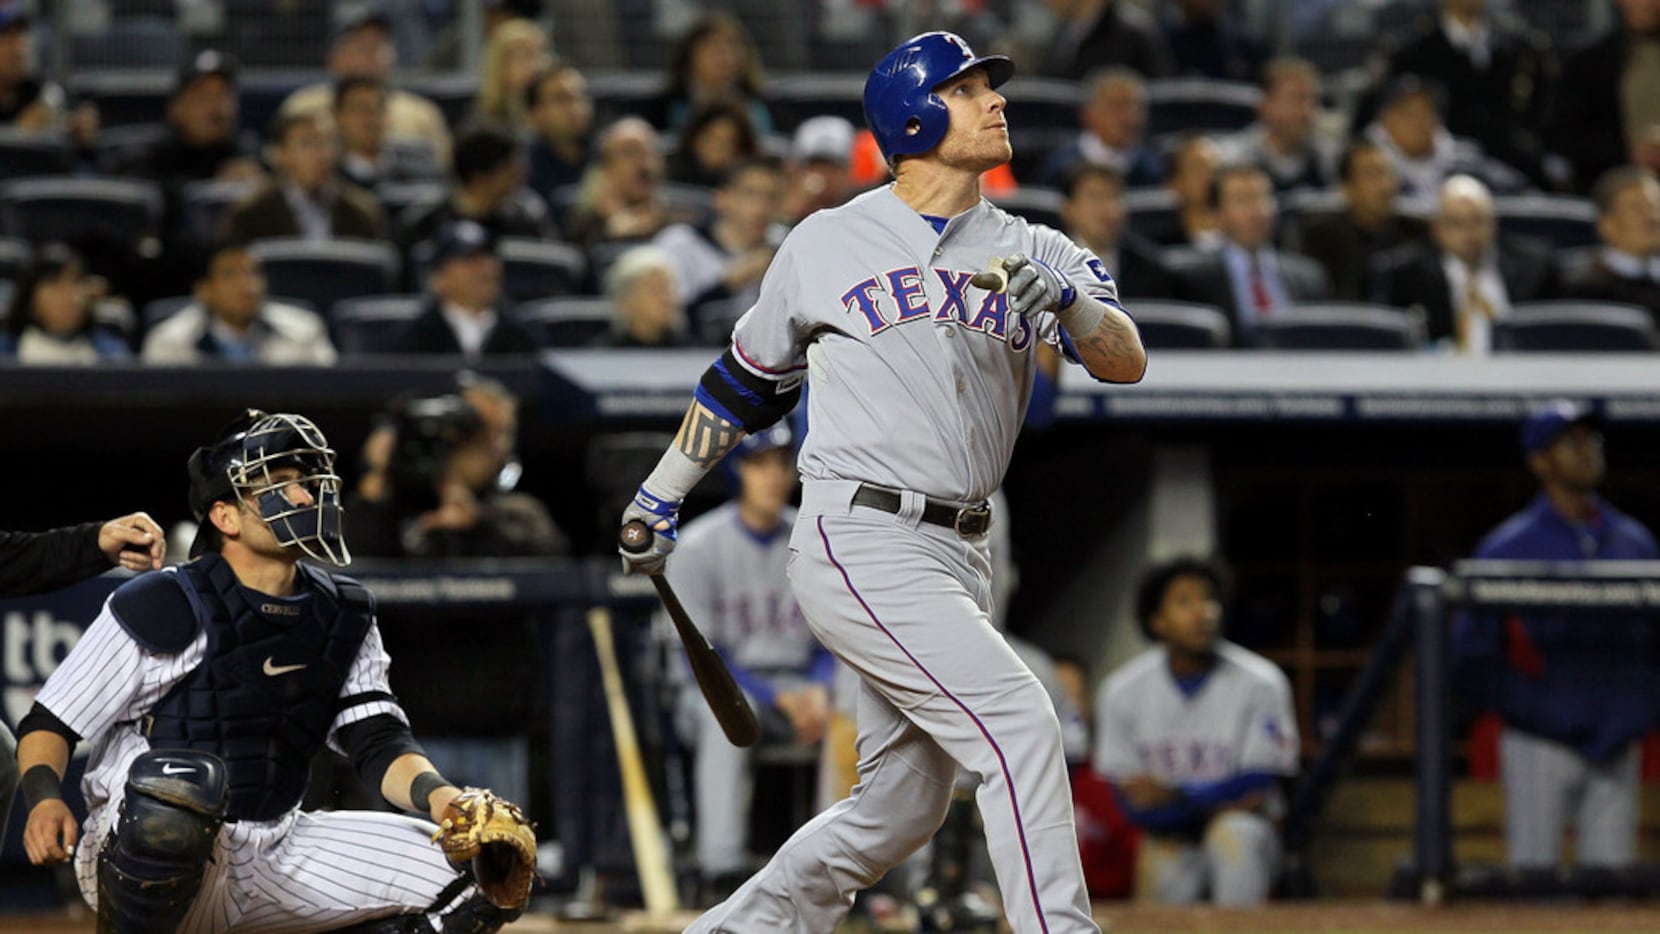 Josh Hamilton Welcomes Latest Chance for New Start, With Rangers